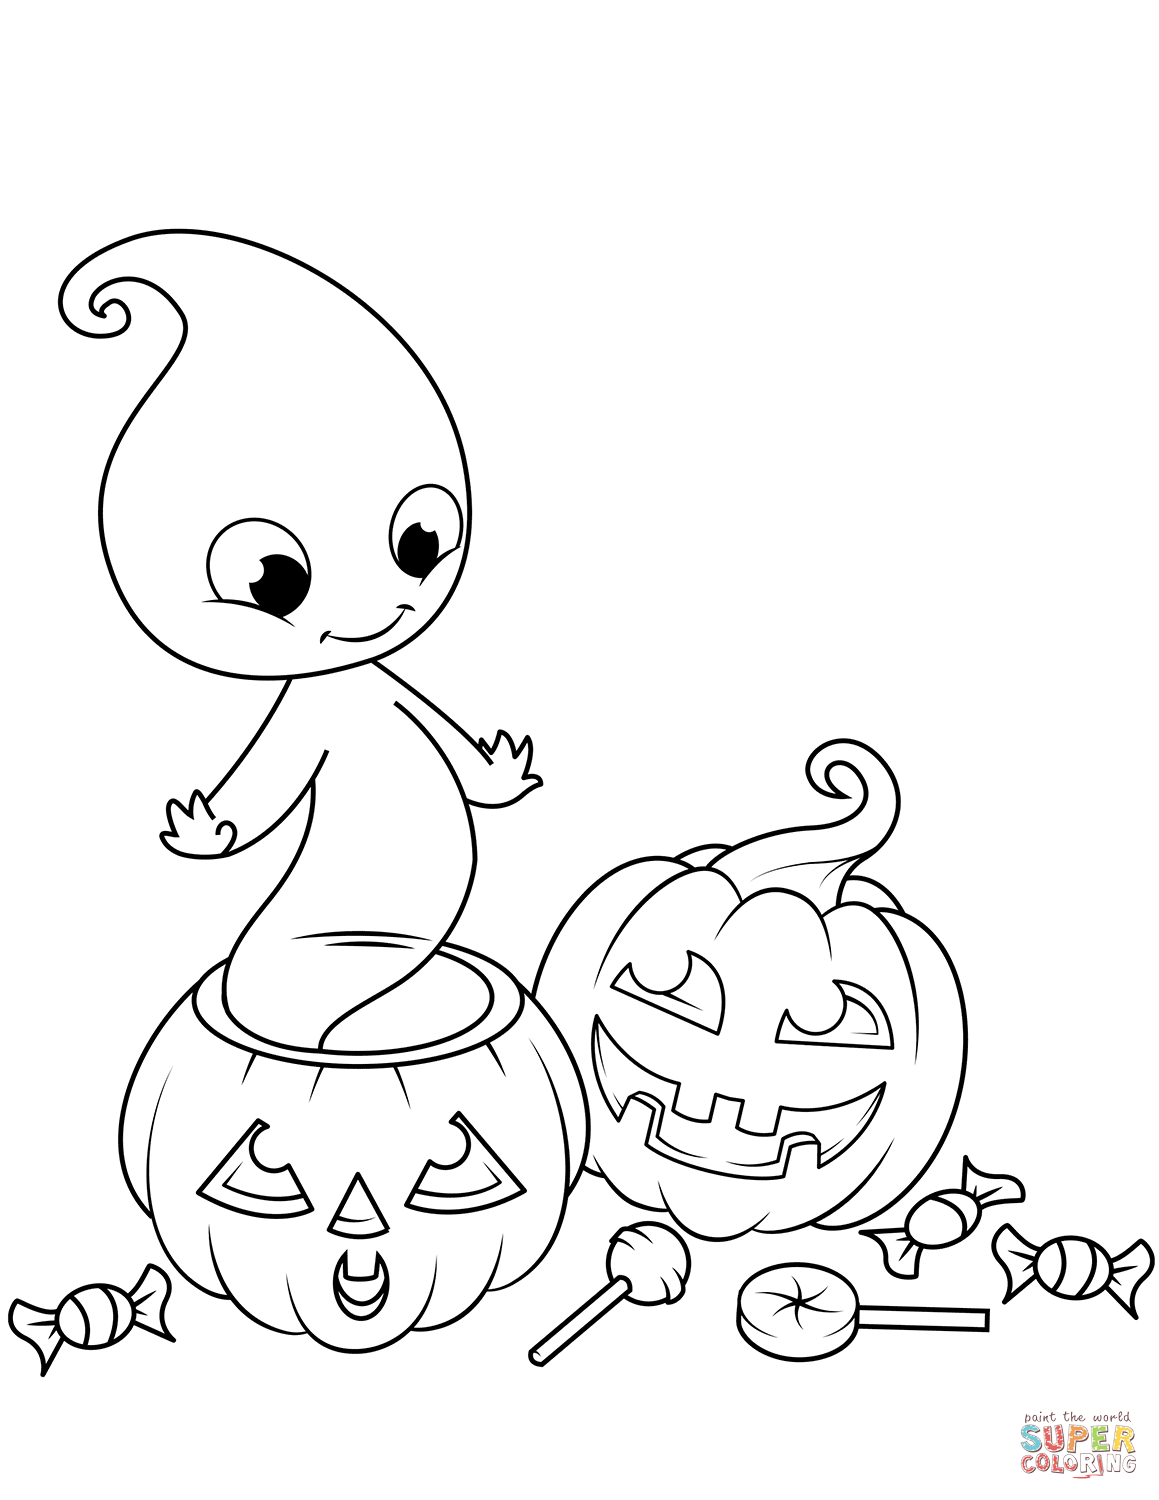 Cute ghost from jack olantern coloring page free printable coloring pages